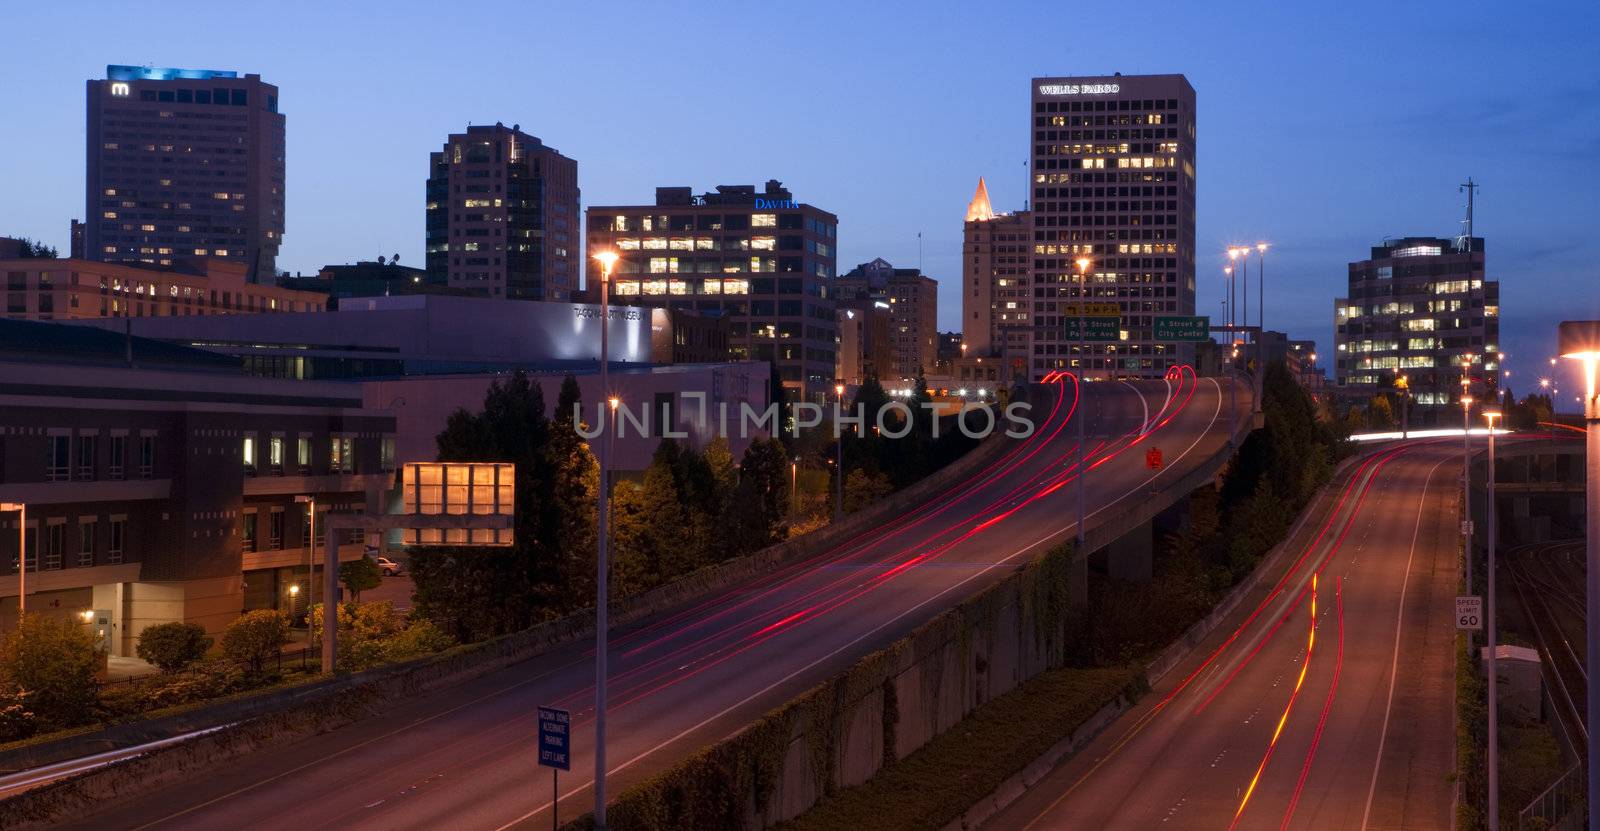 The highway ends right downtown in Tacoma Washington